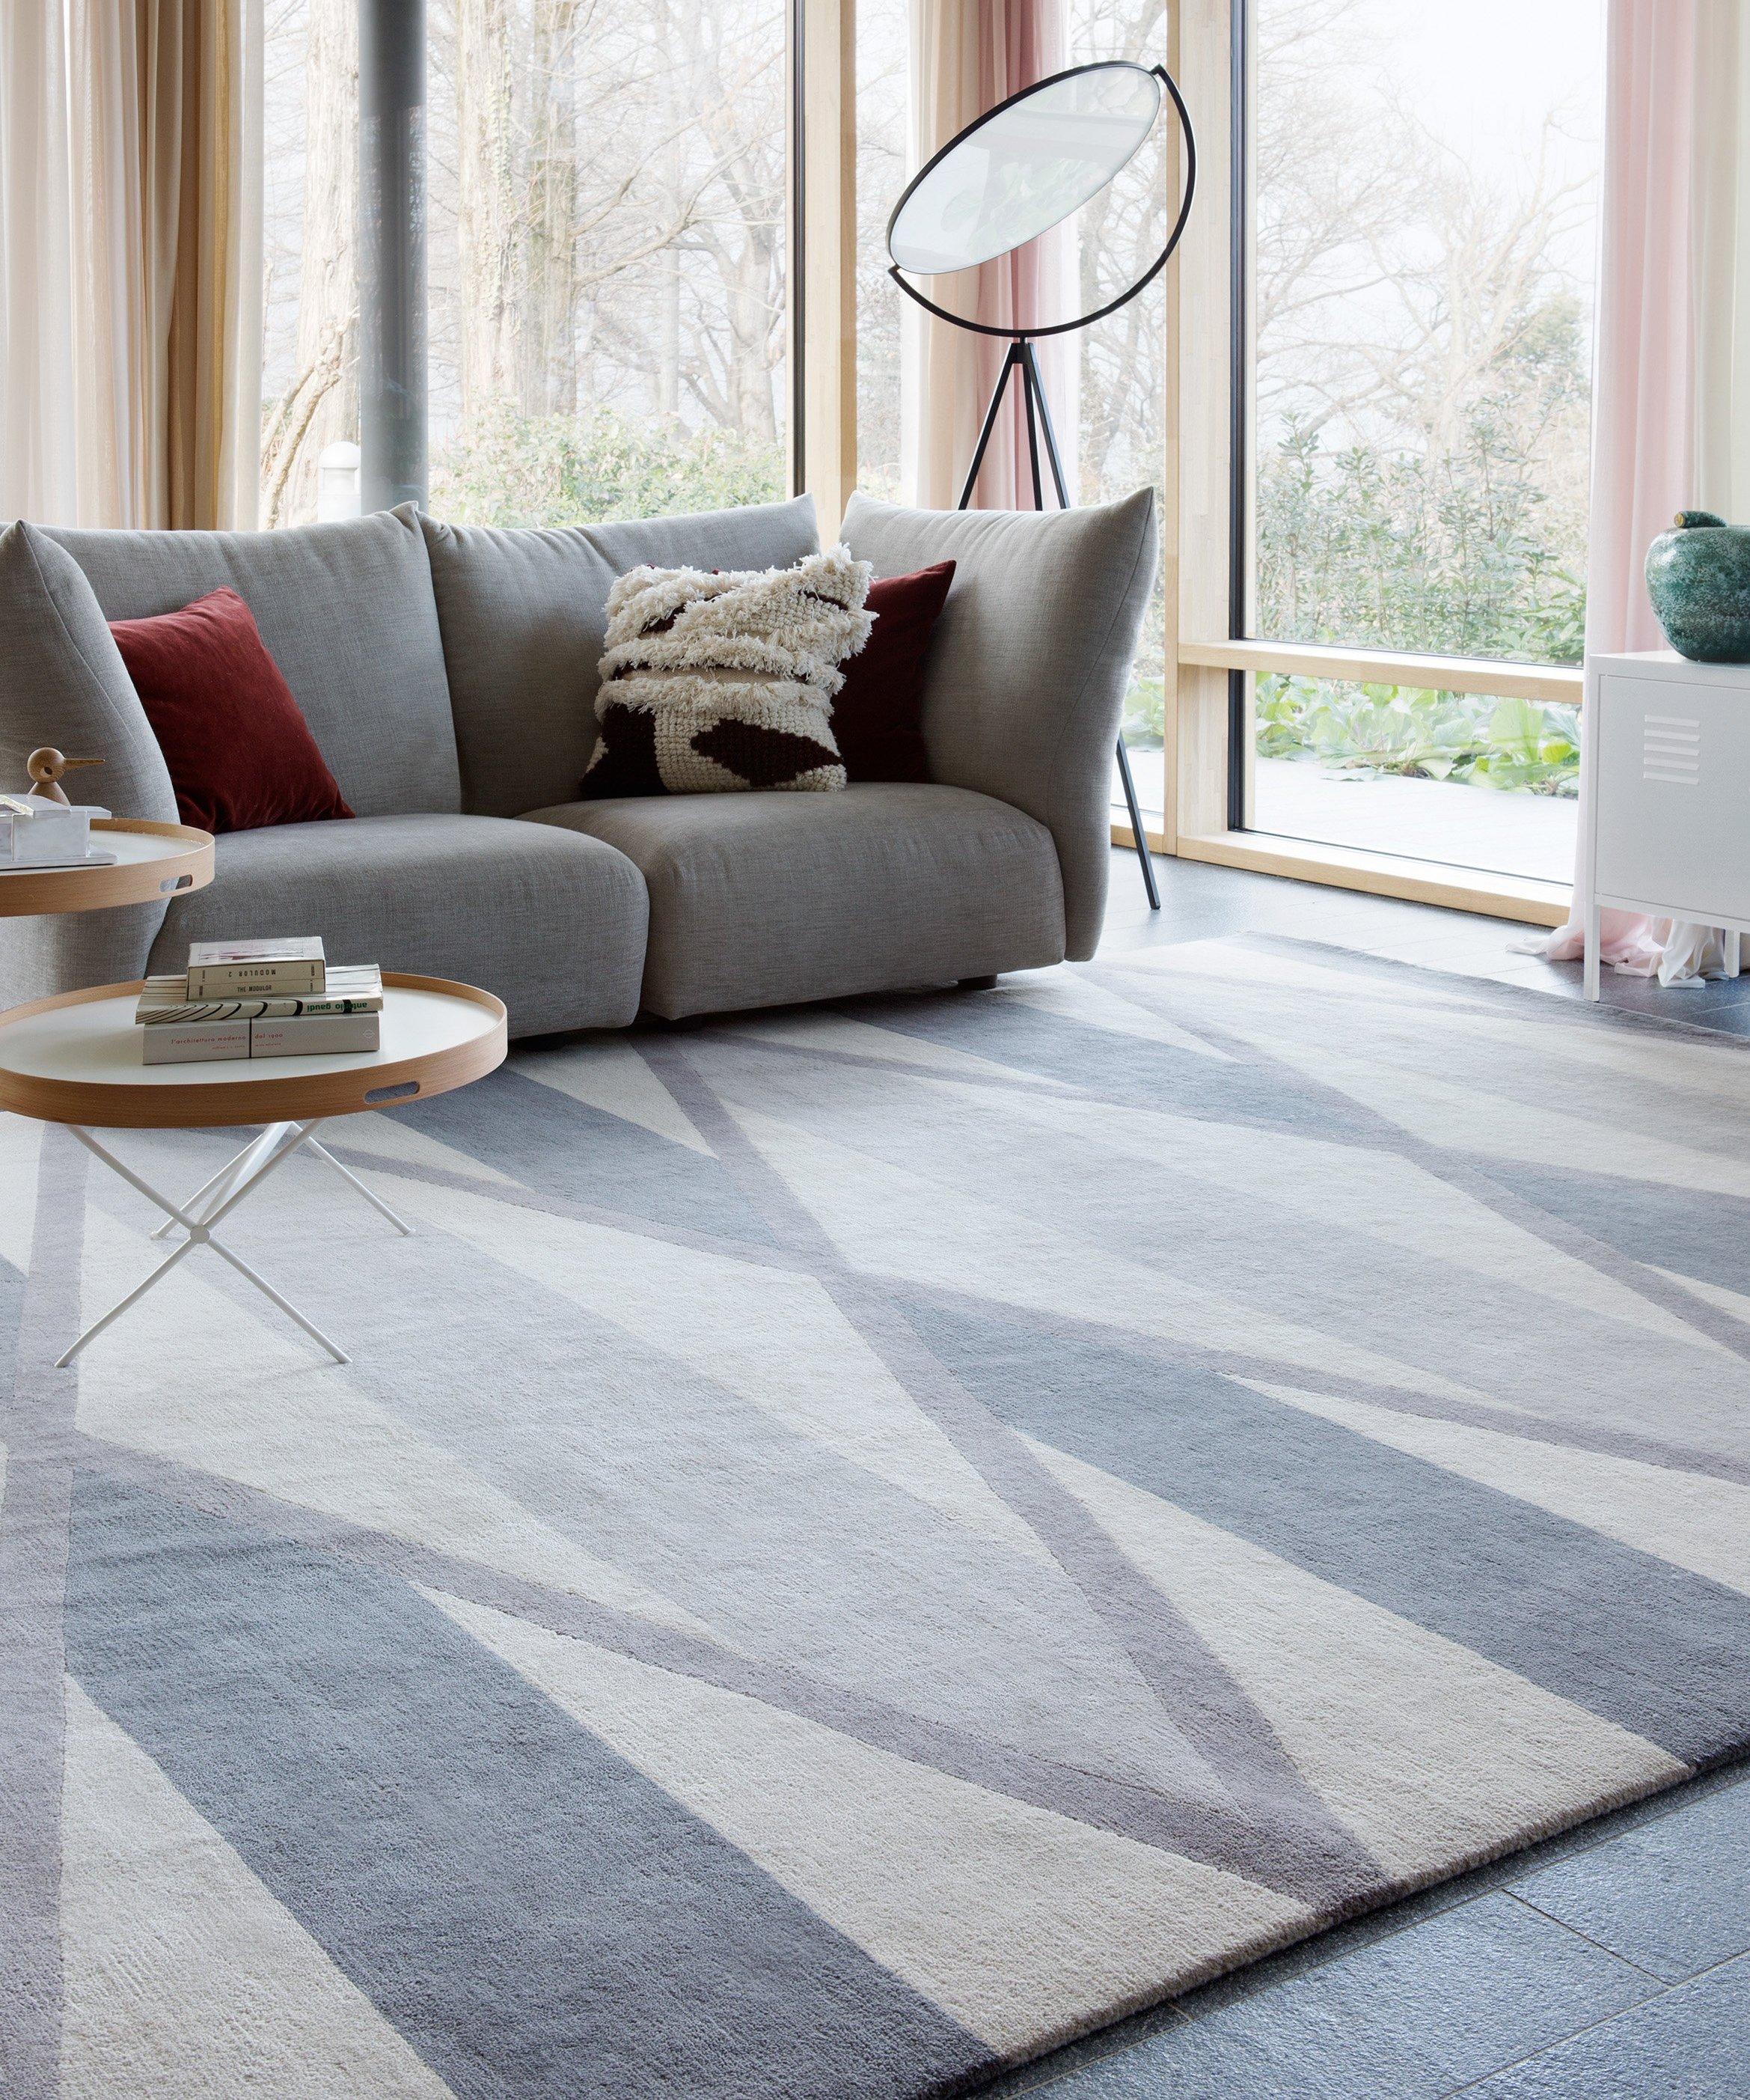 Based on an American quilt pattern and composed of a pared-back palette of muted grey and cream, Taos combines diamonds and lines in perfect proportion to create a mirrored effect. Hand-knotted in the finest Tibetan wool, the rug has undertones of